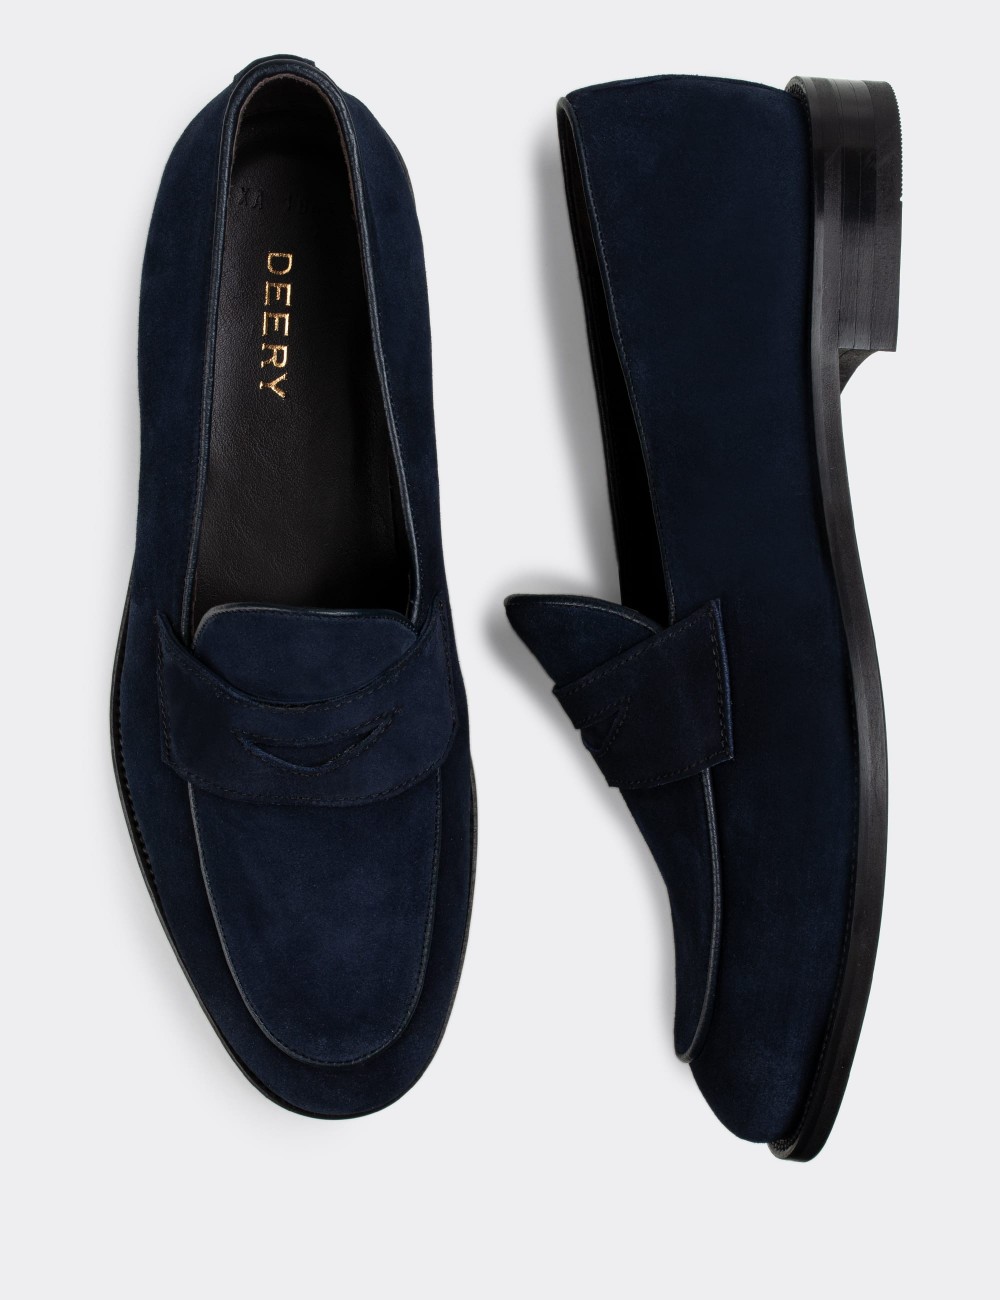 Navy Suede Leather Loafers - 01845MLCVN01